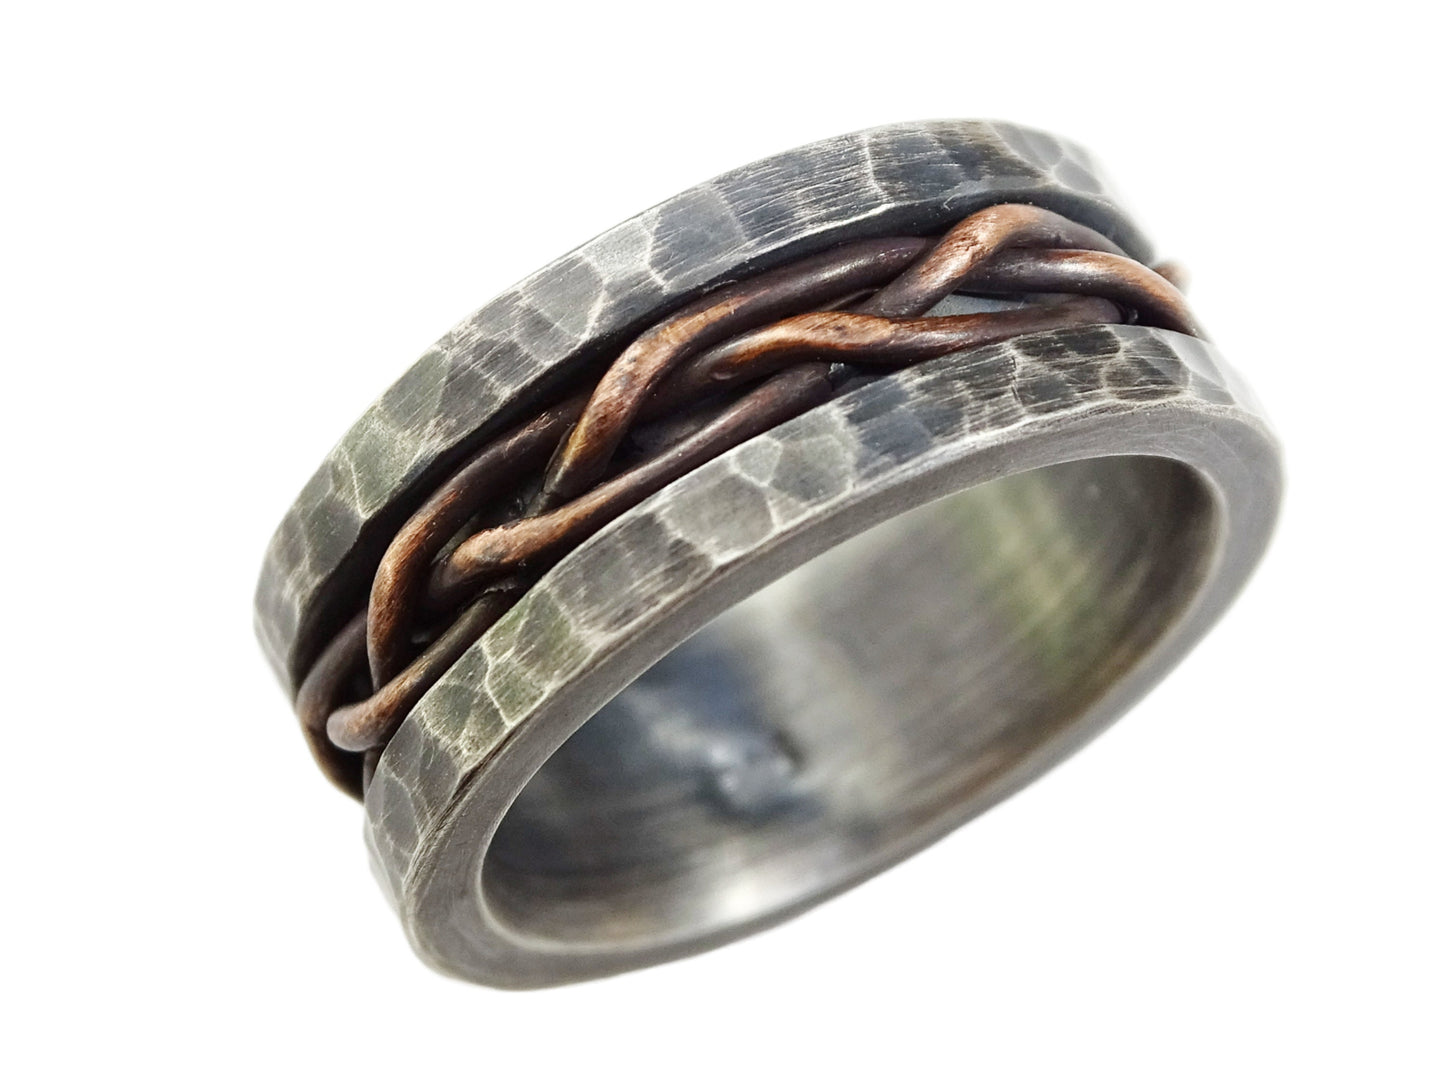 braided men's wedding ring hand woven copper inlay silver band